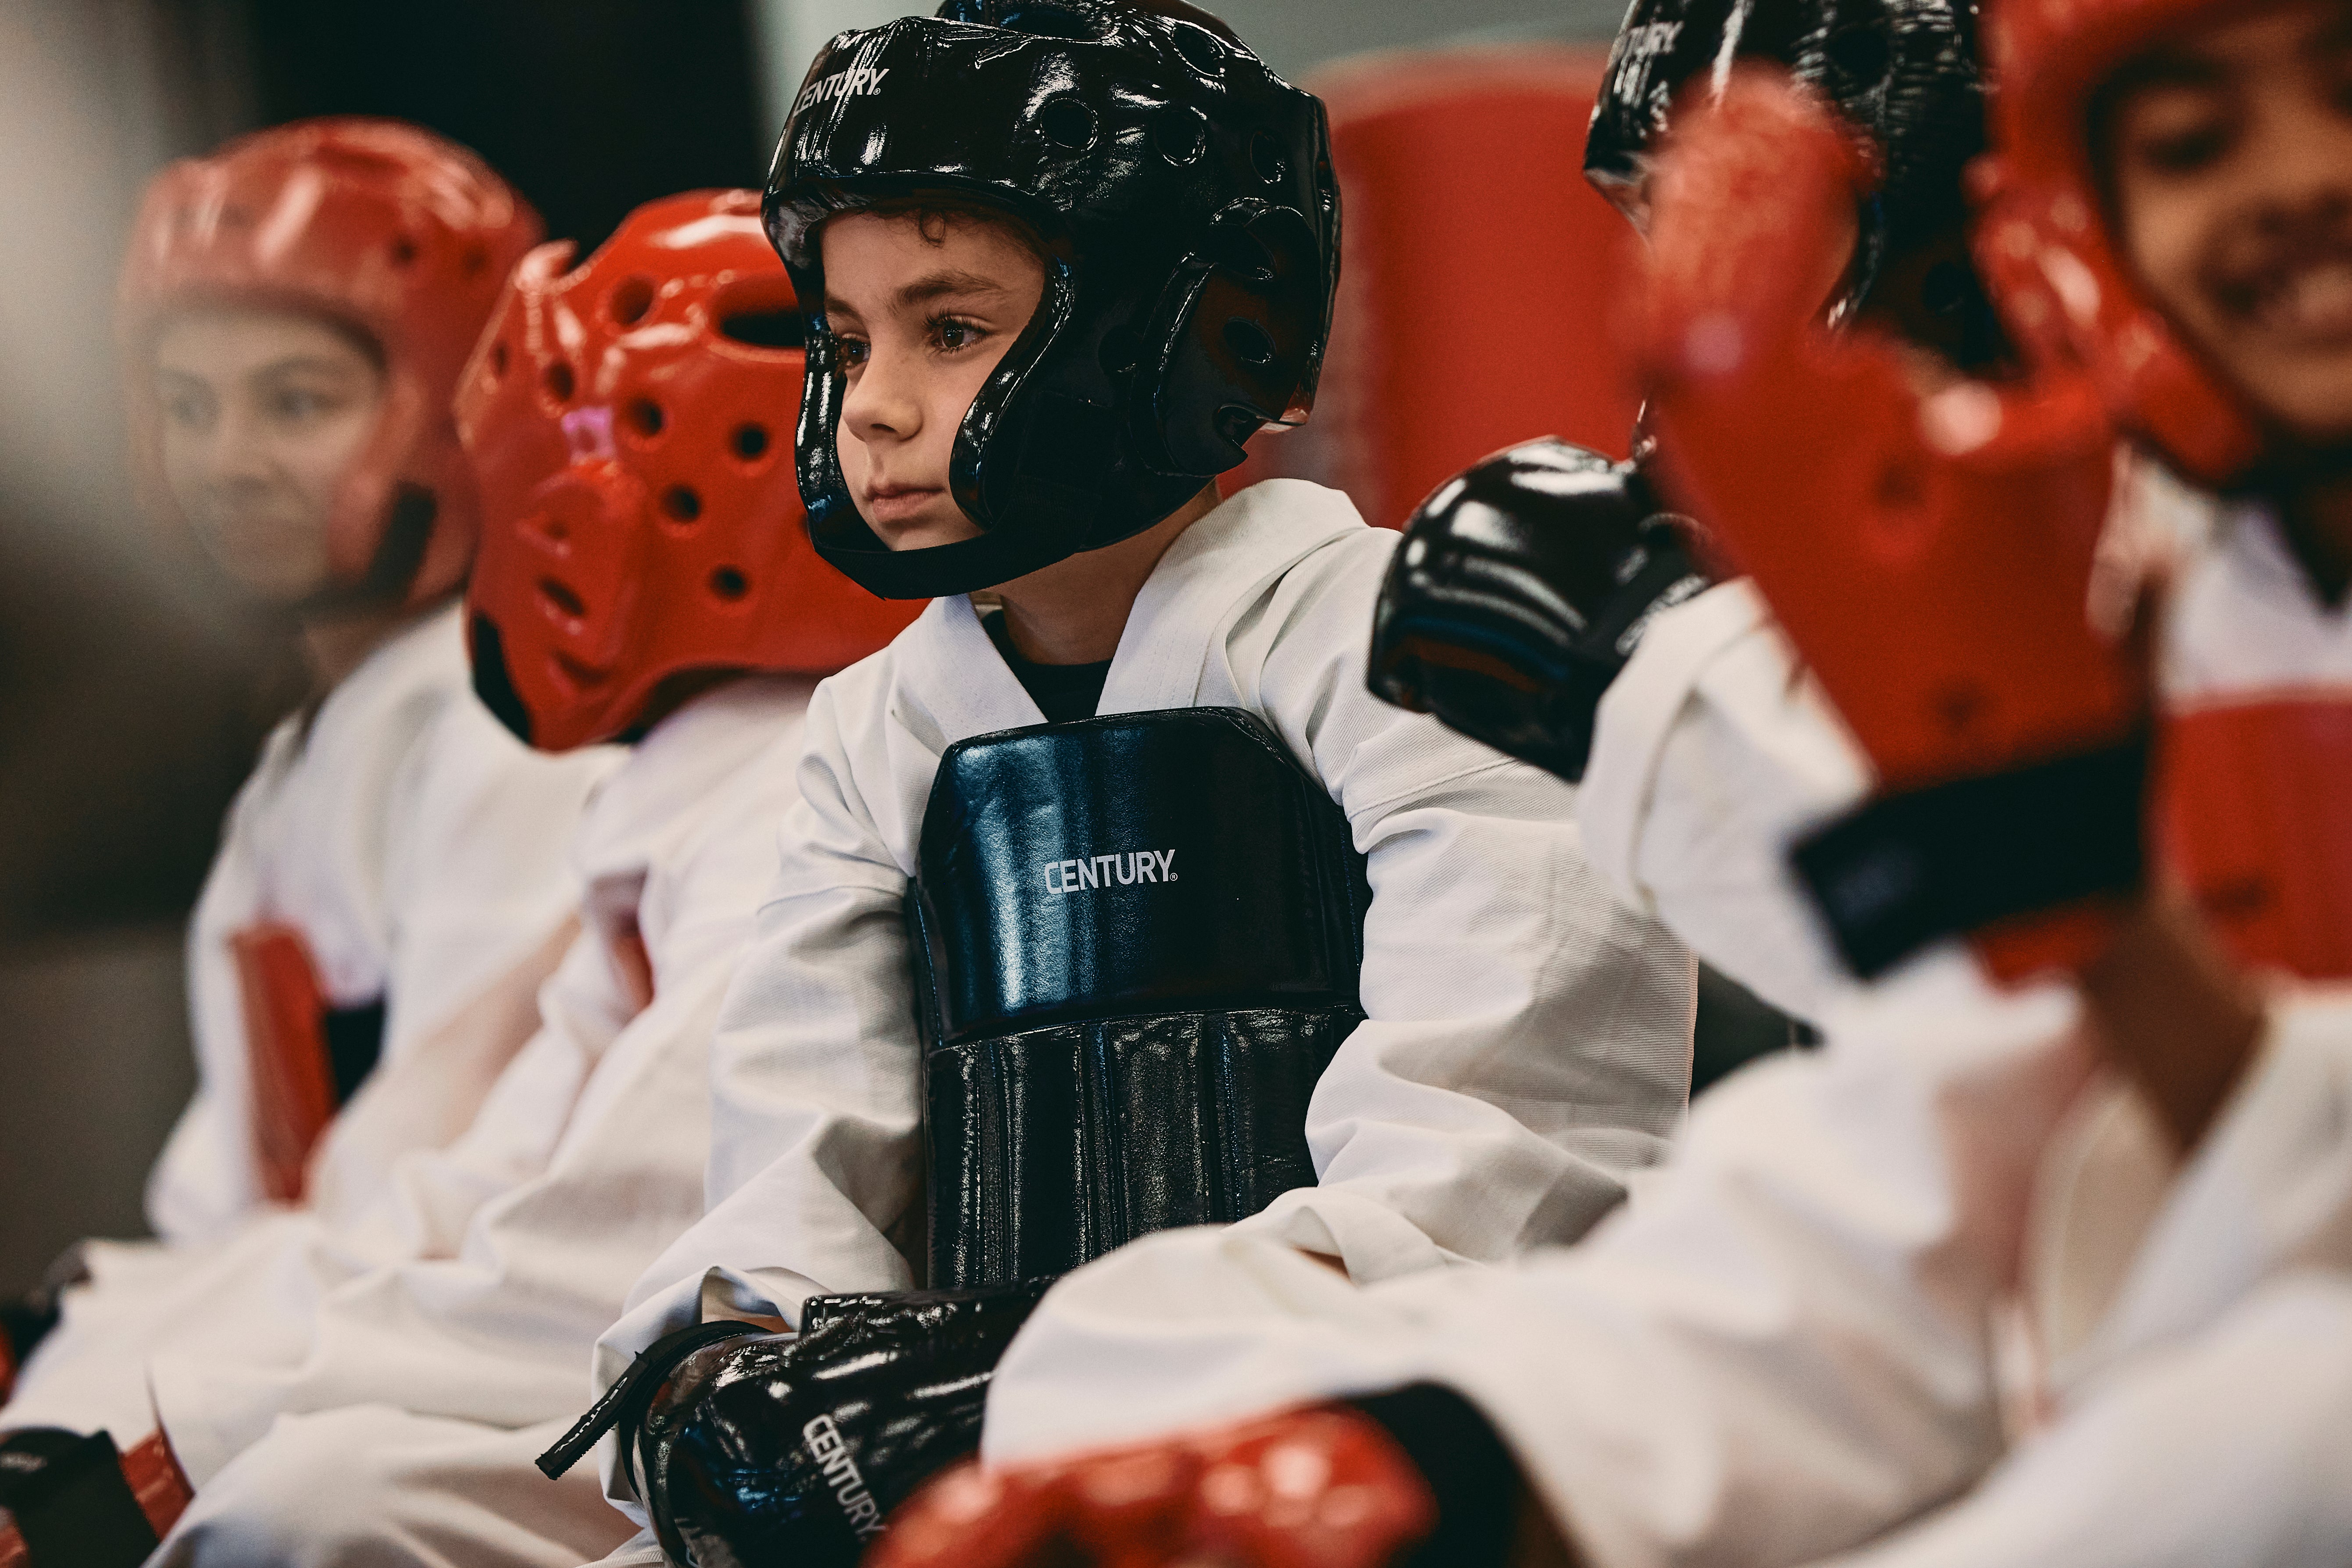 kids wearing sparring gear, sitting on the mat